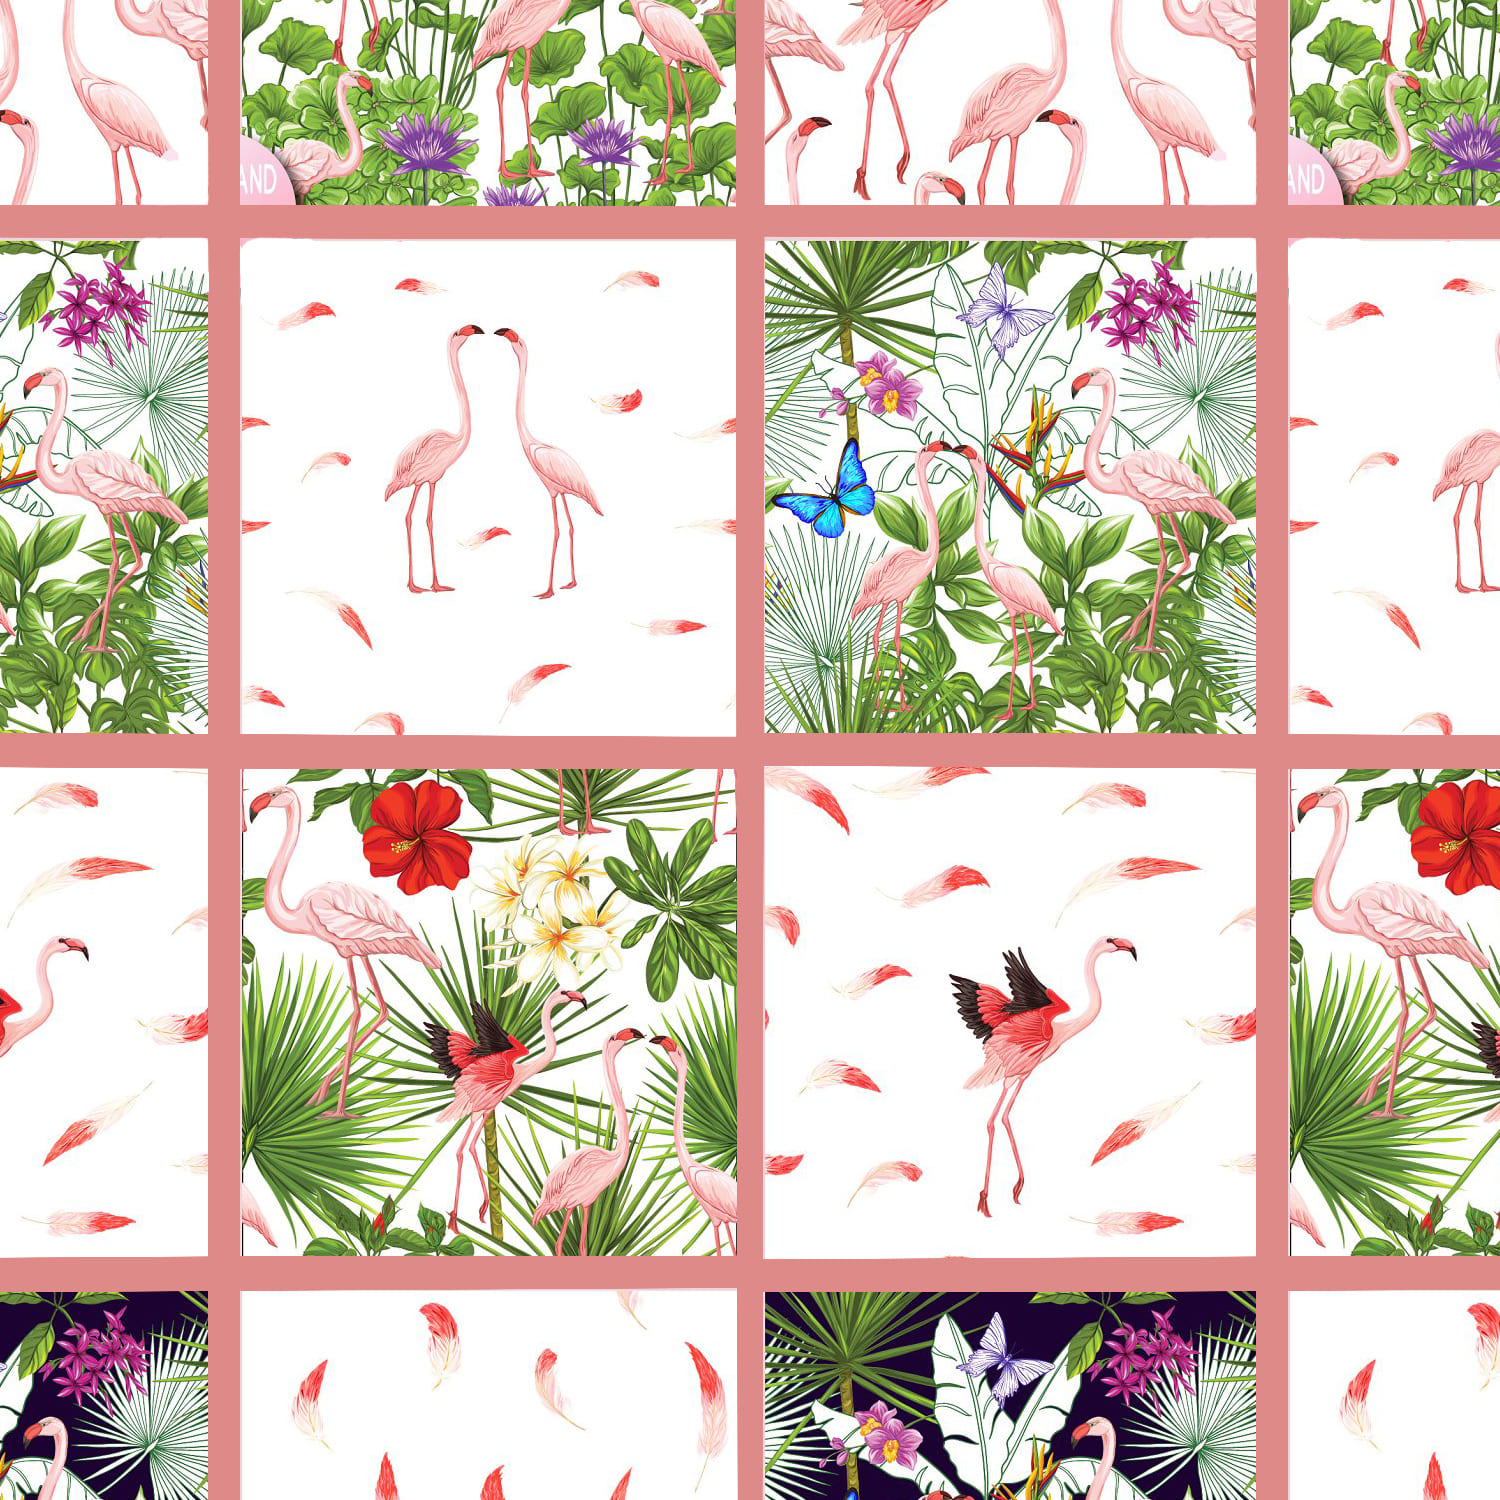 8 Flamingo Seamless Patterns cover.